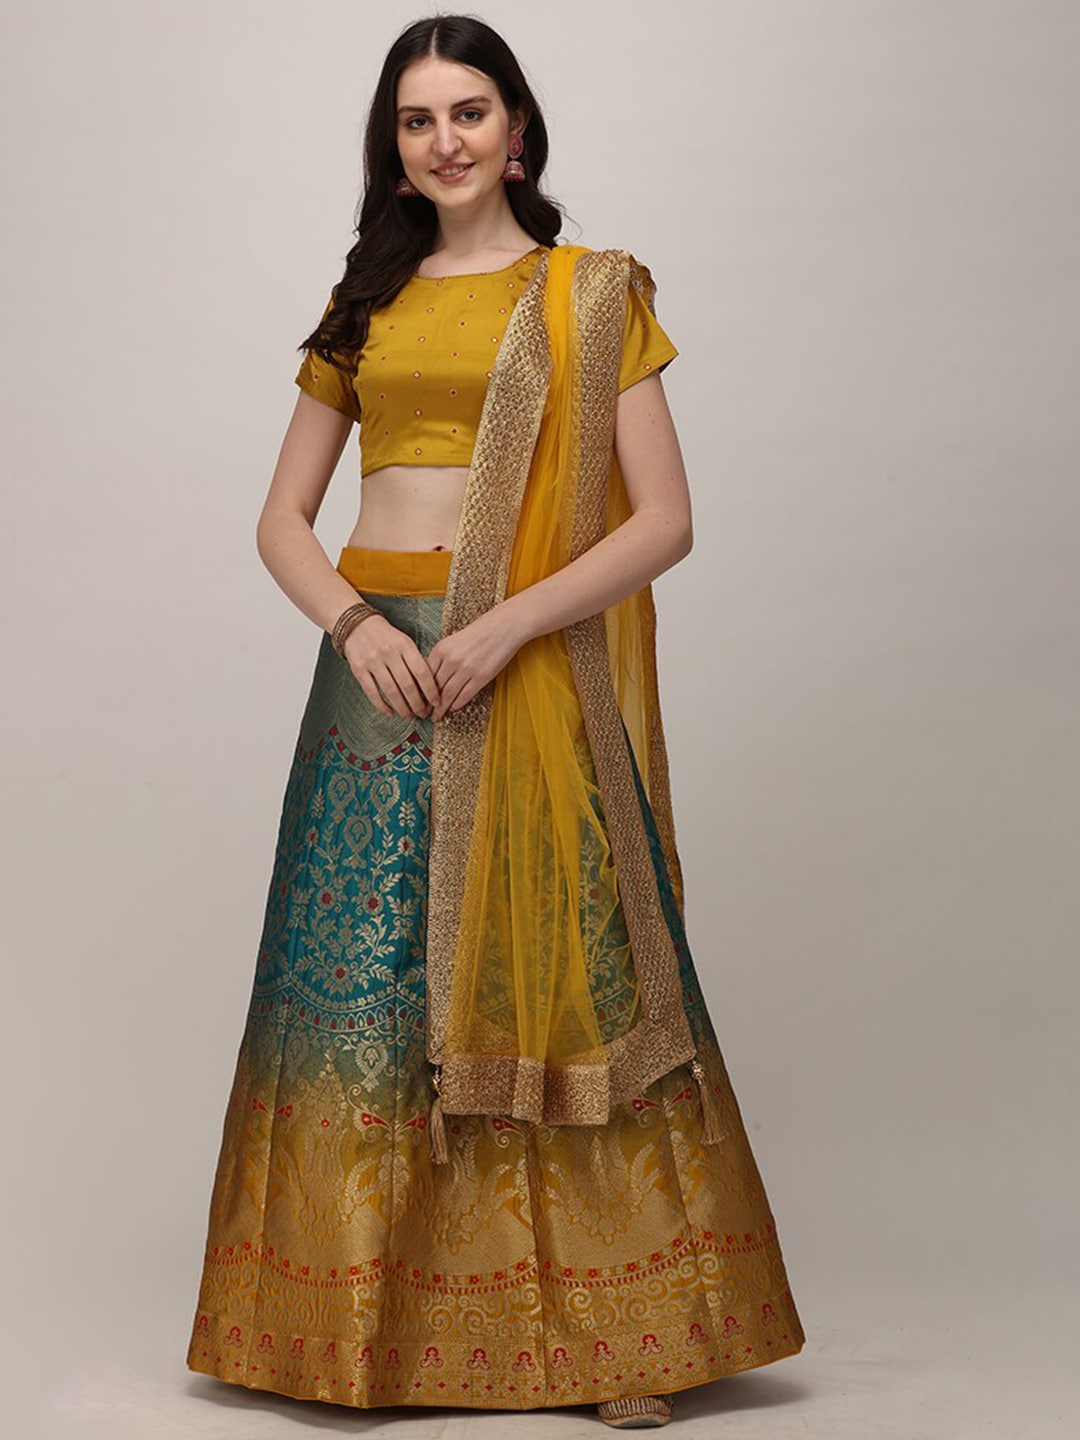 DEETYA ARTS Yellow & Gold-Toned Semi-Stitched Lehenga & Unstitched Blouse With Dupatta Price in India